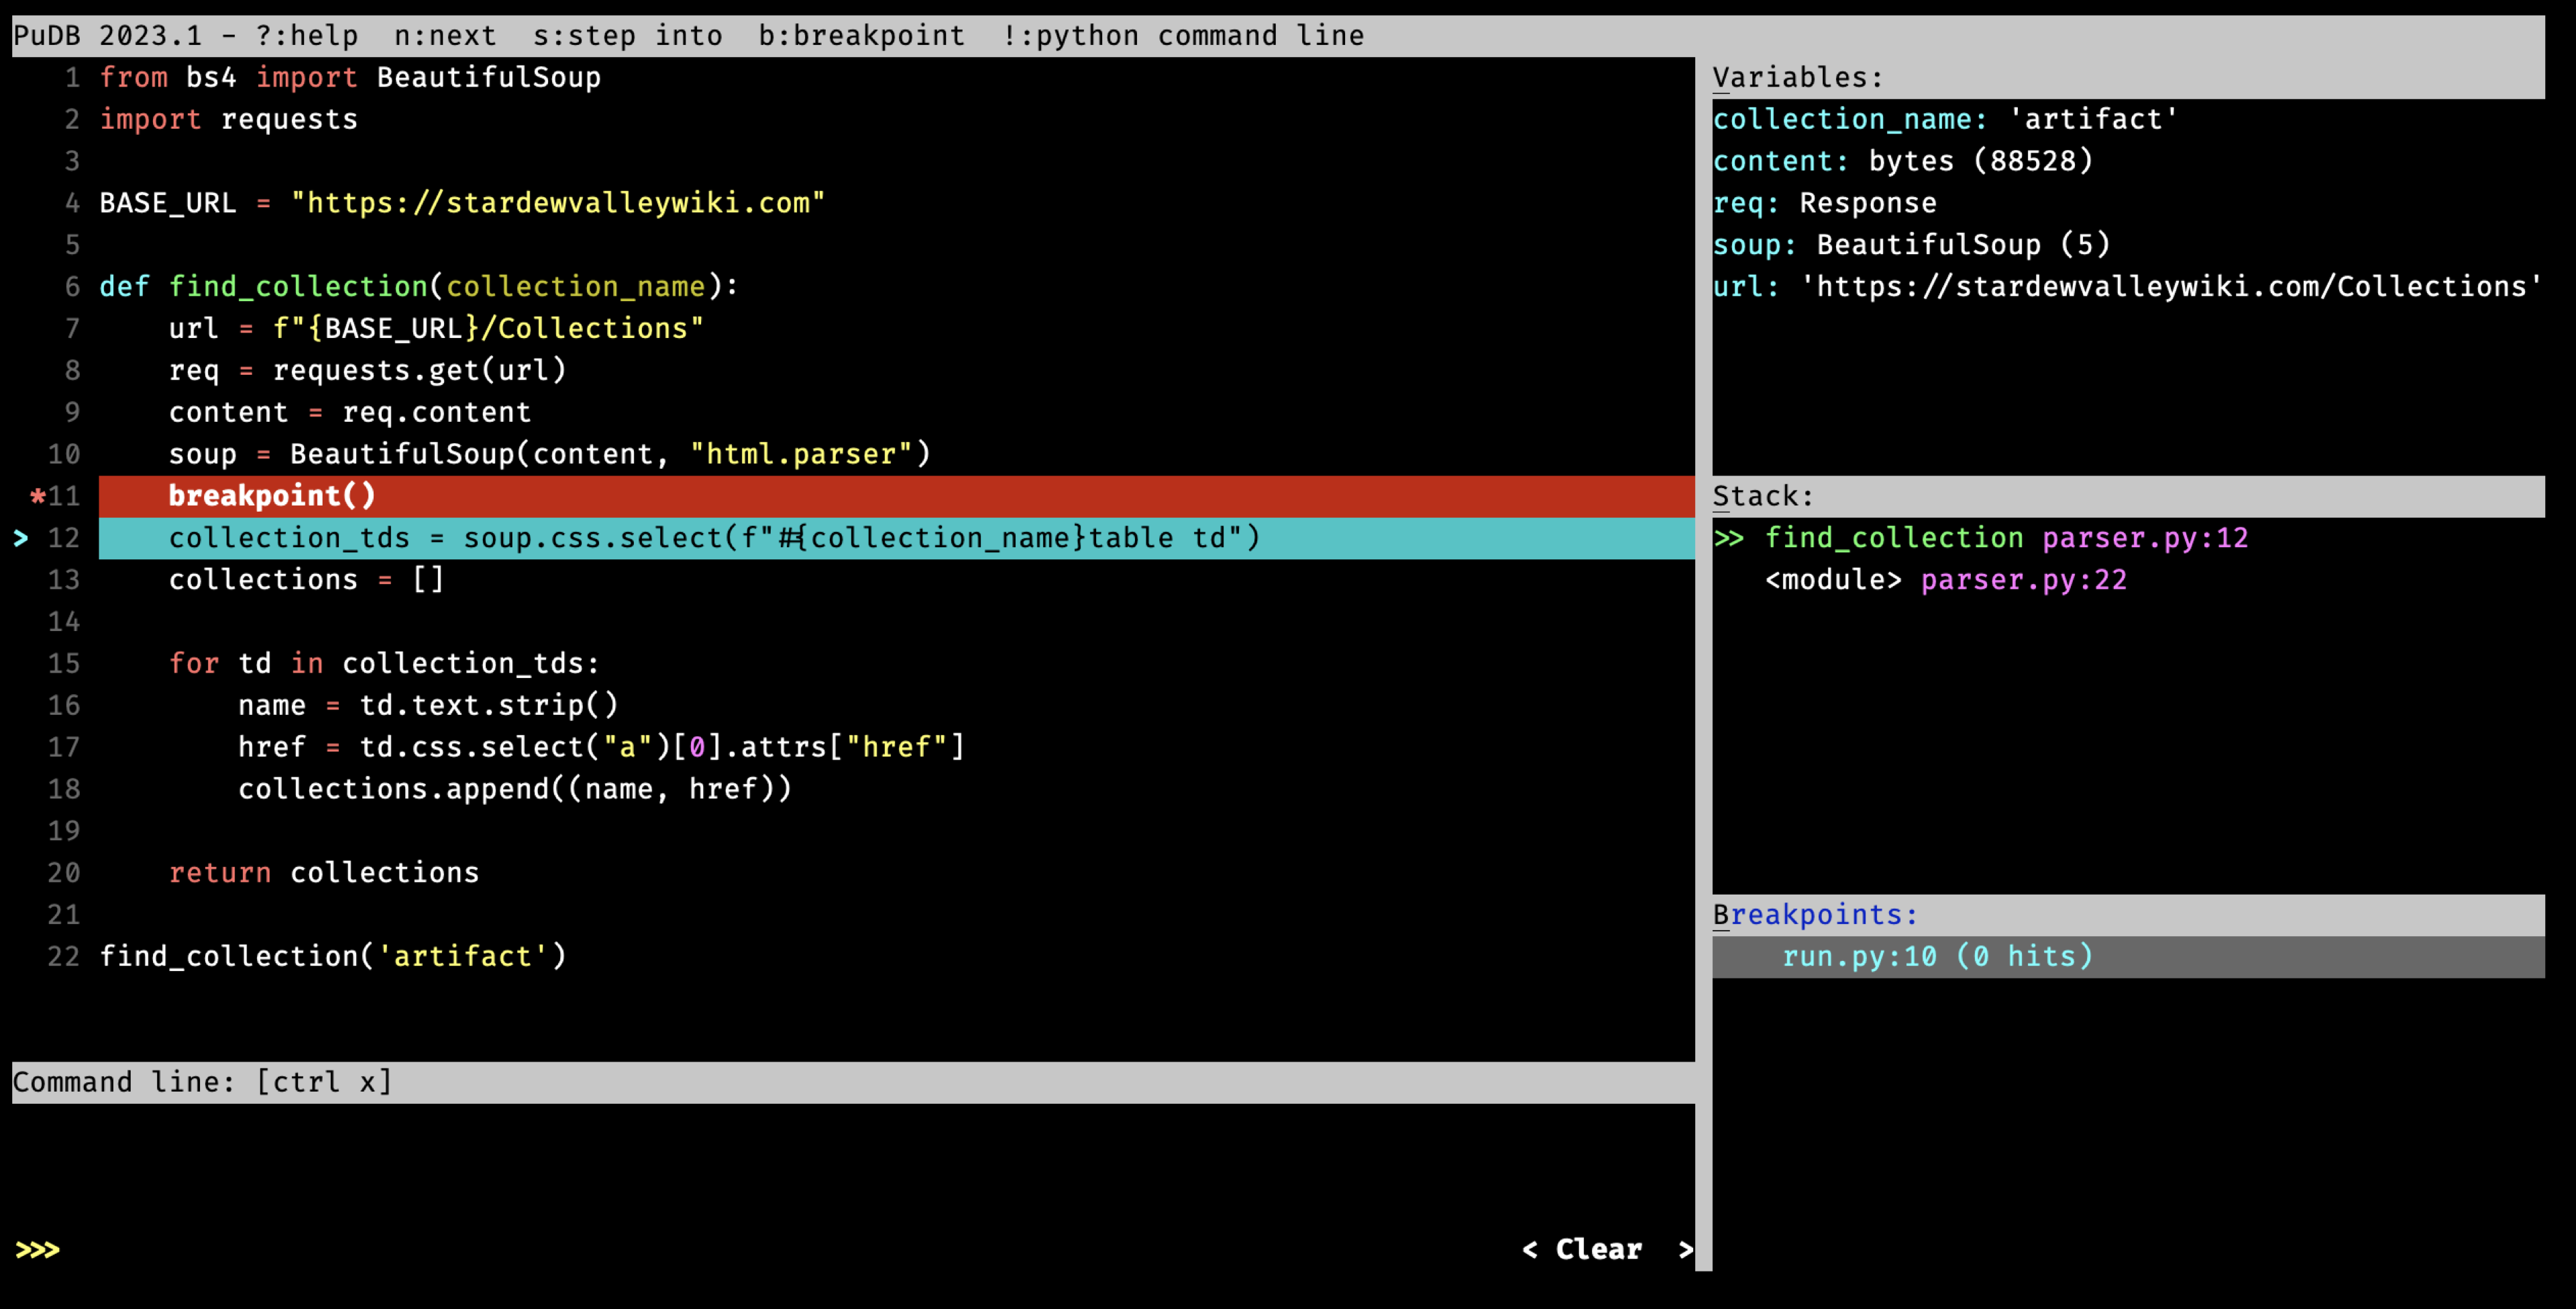 PuDB debugger open in the terminal with five panes: code, variables, stack, breakpoints and command line. A breakpoint is active. 